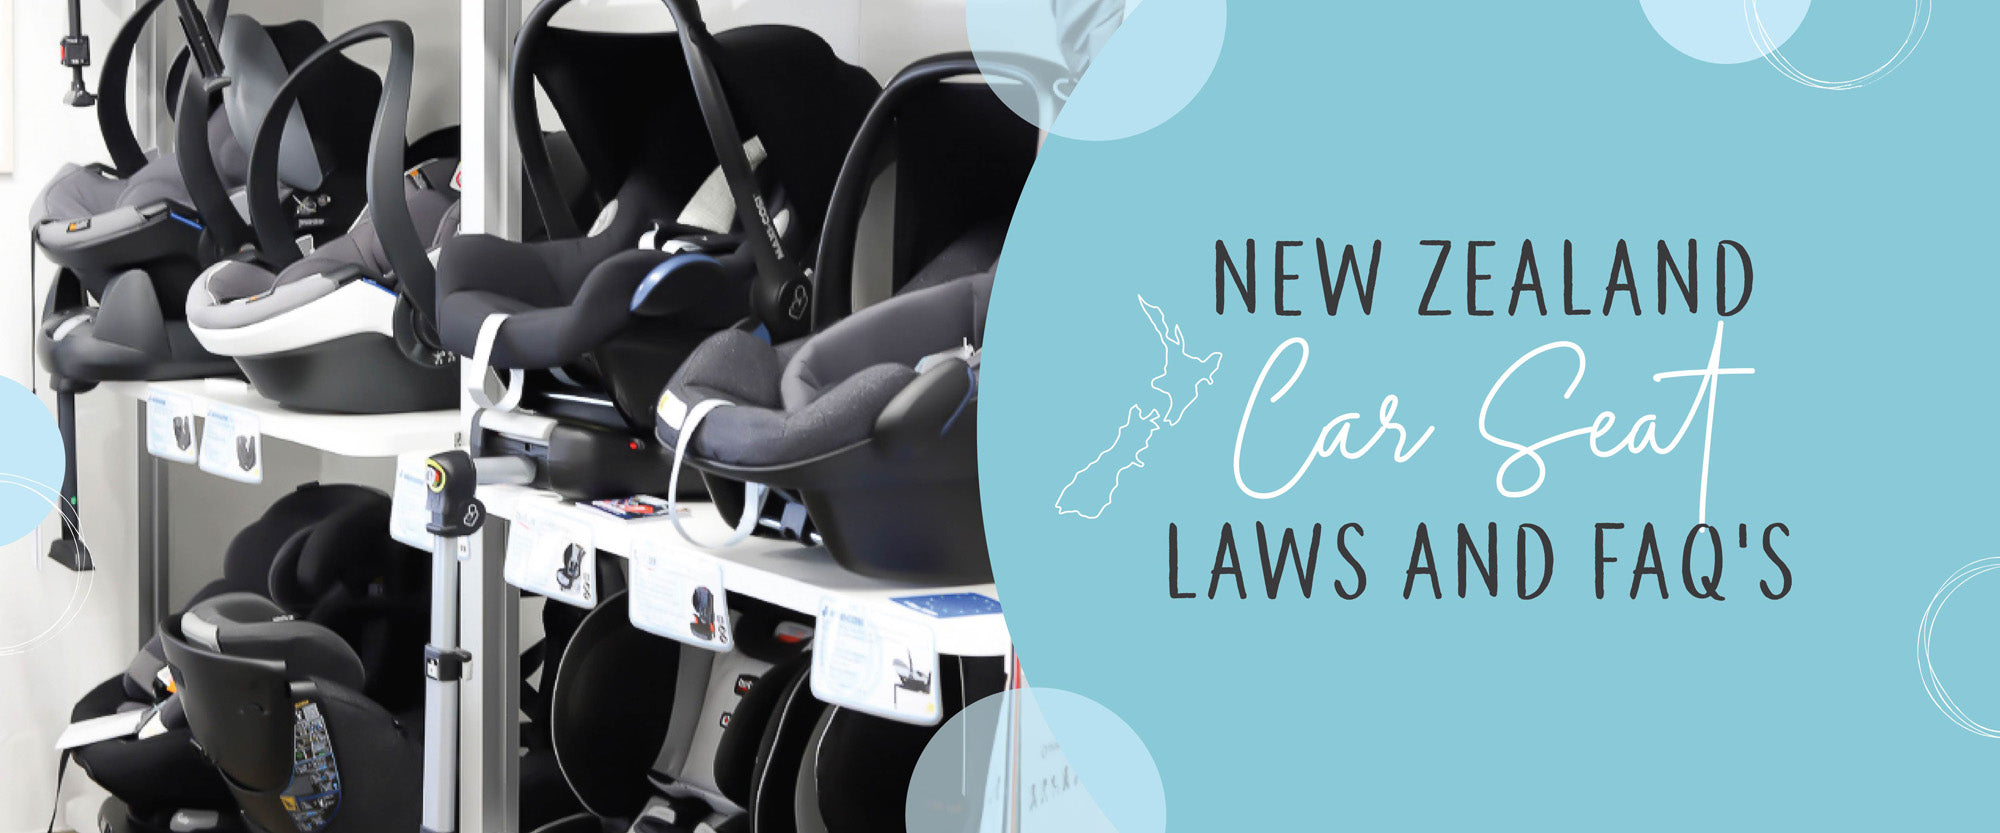 2023 New Zealand Car Seat Laws And Faq